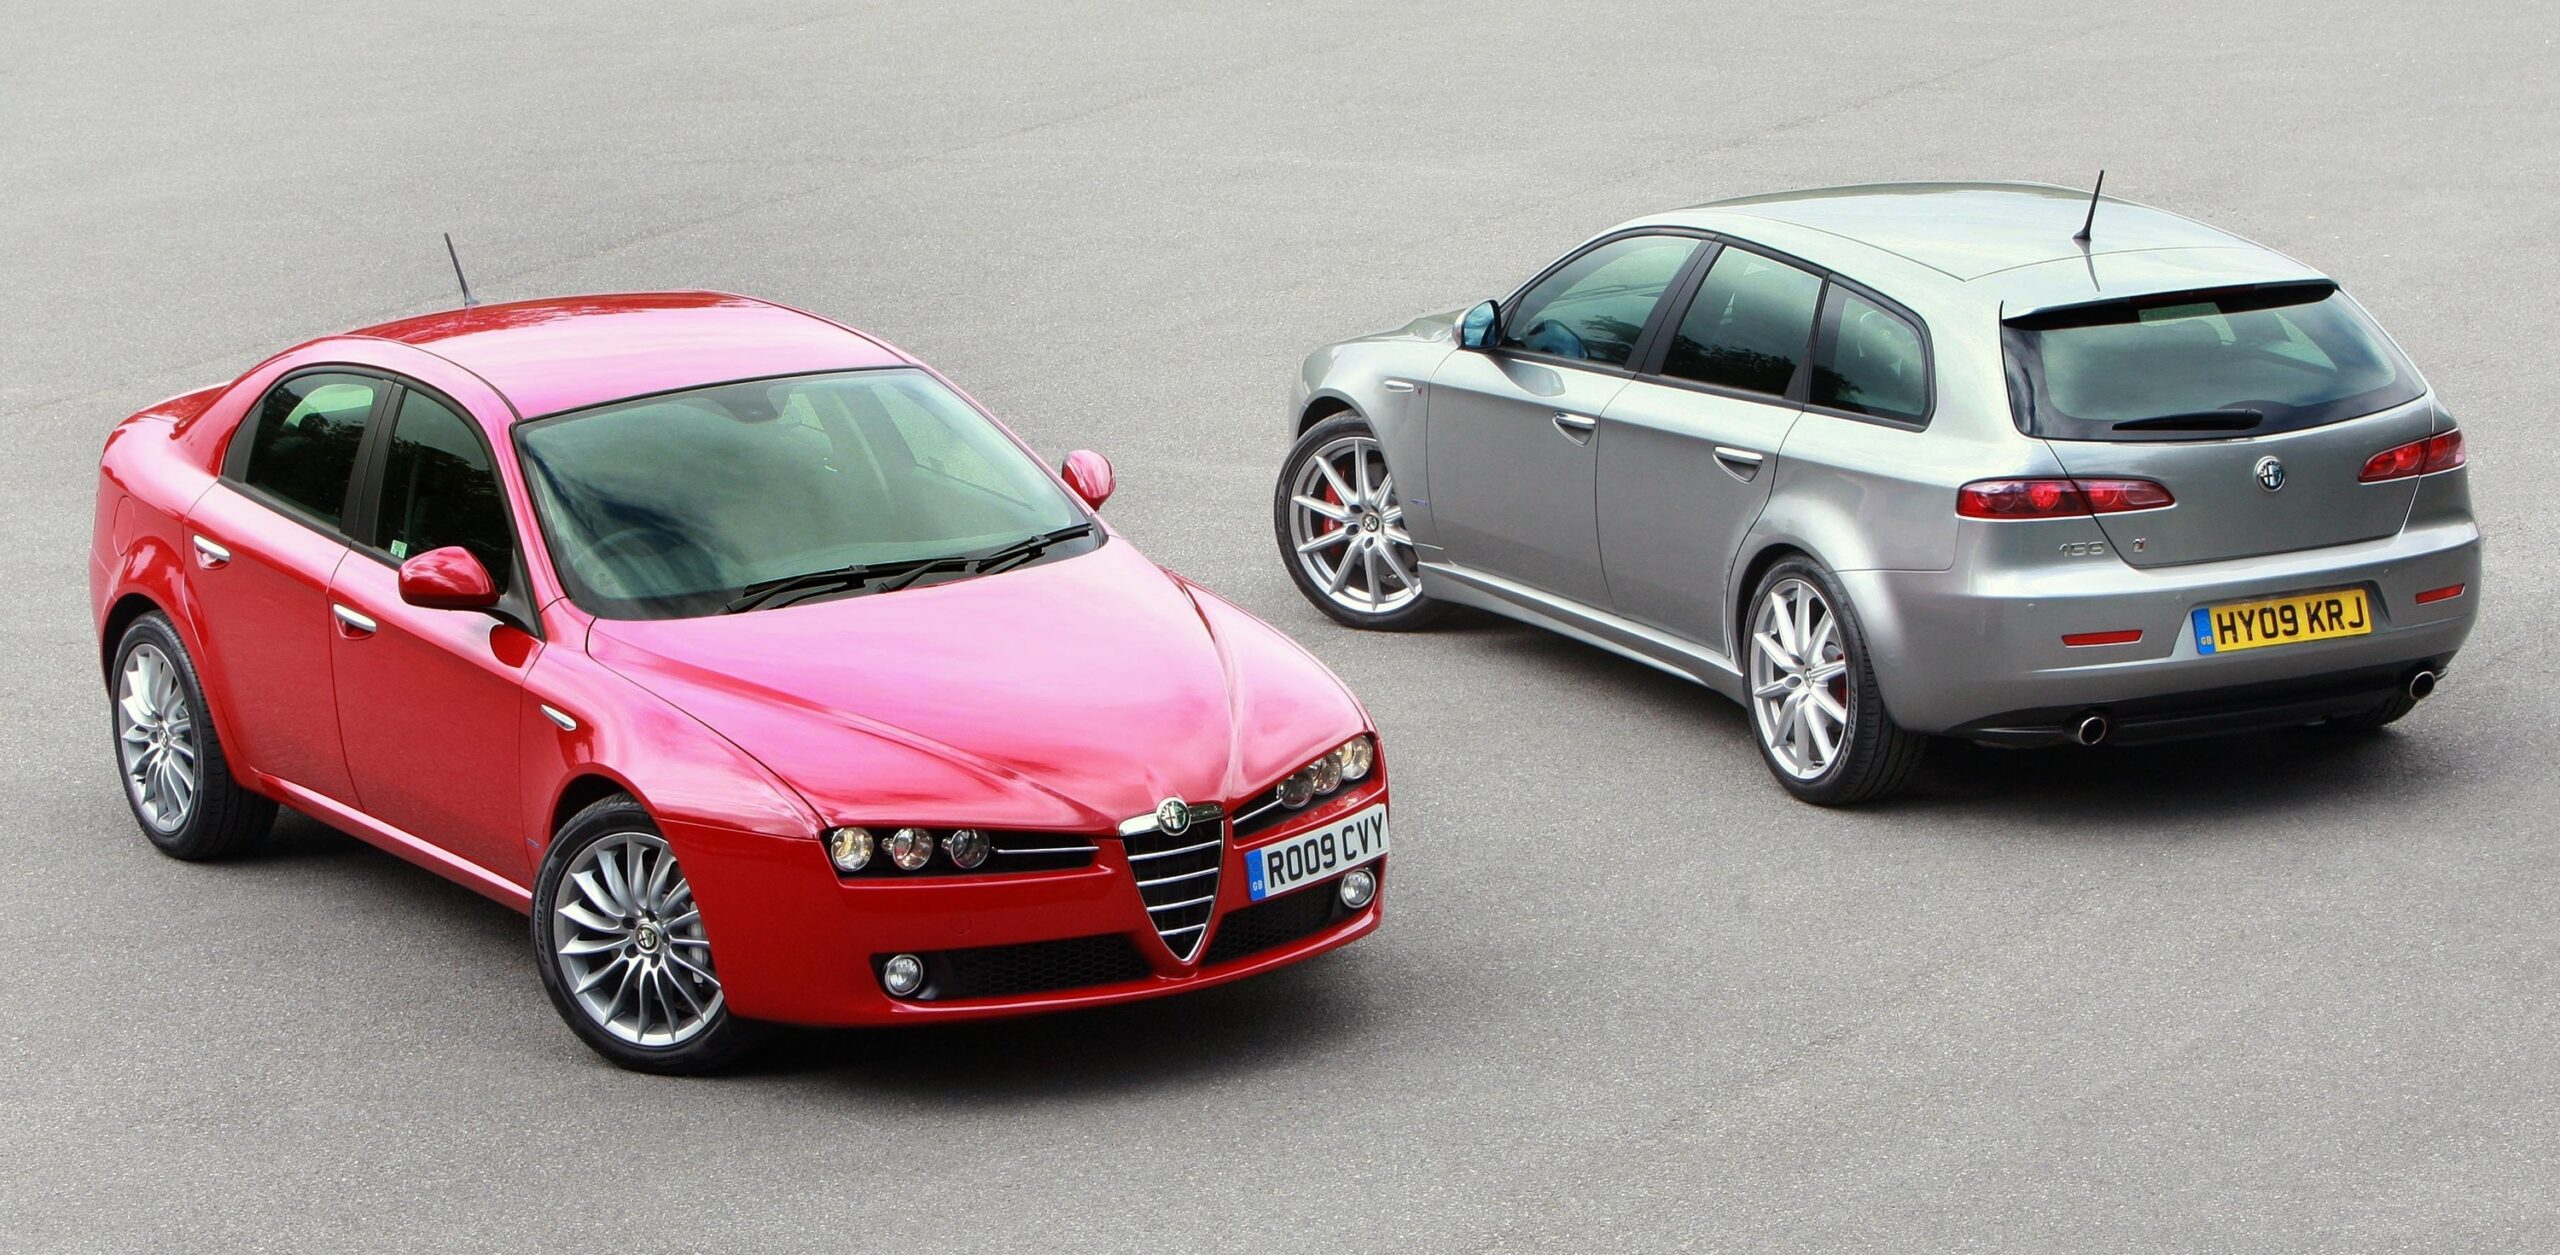 Alfa Romeo 159: Most Up-to-Date Encyclopedia, News & Reviews